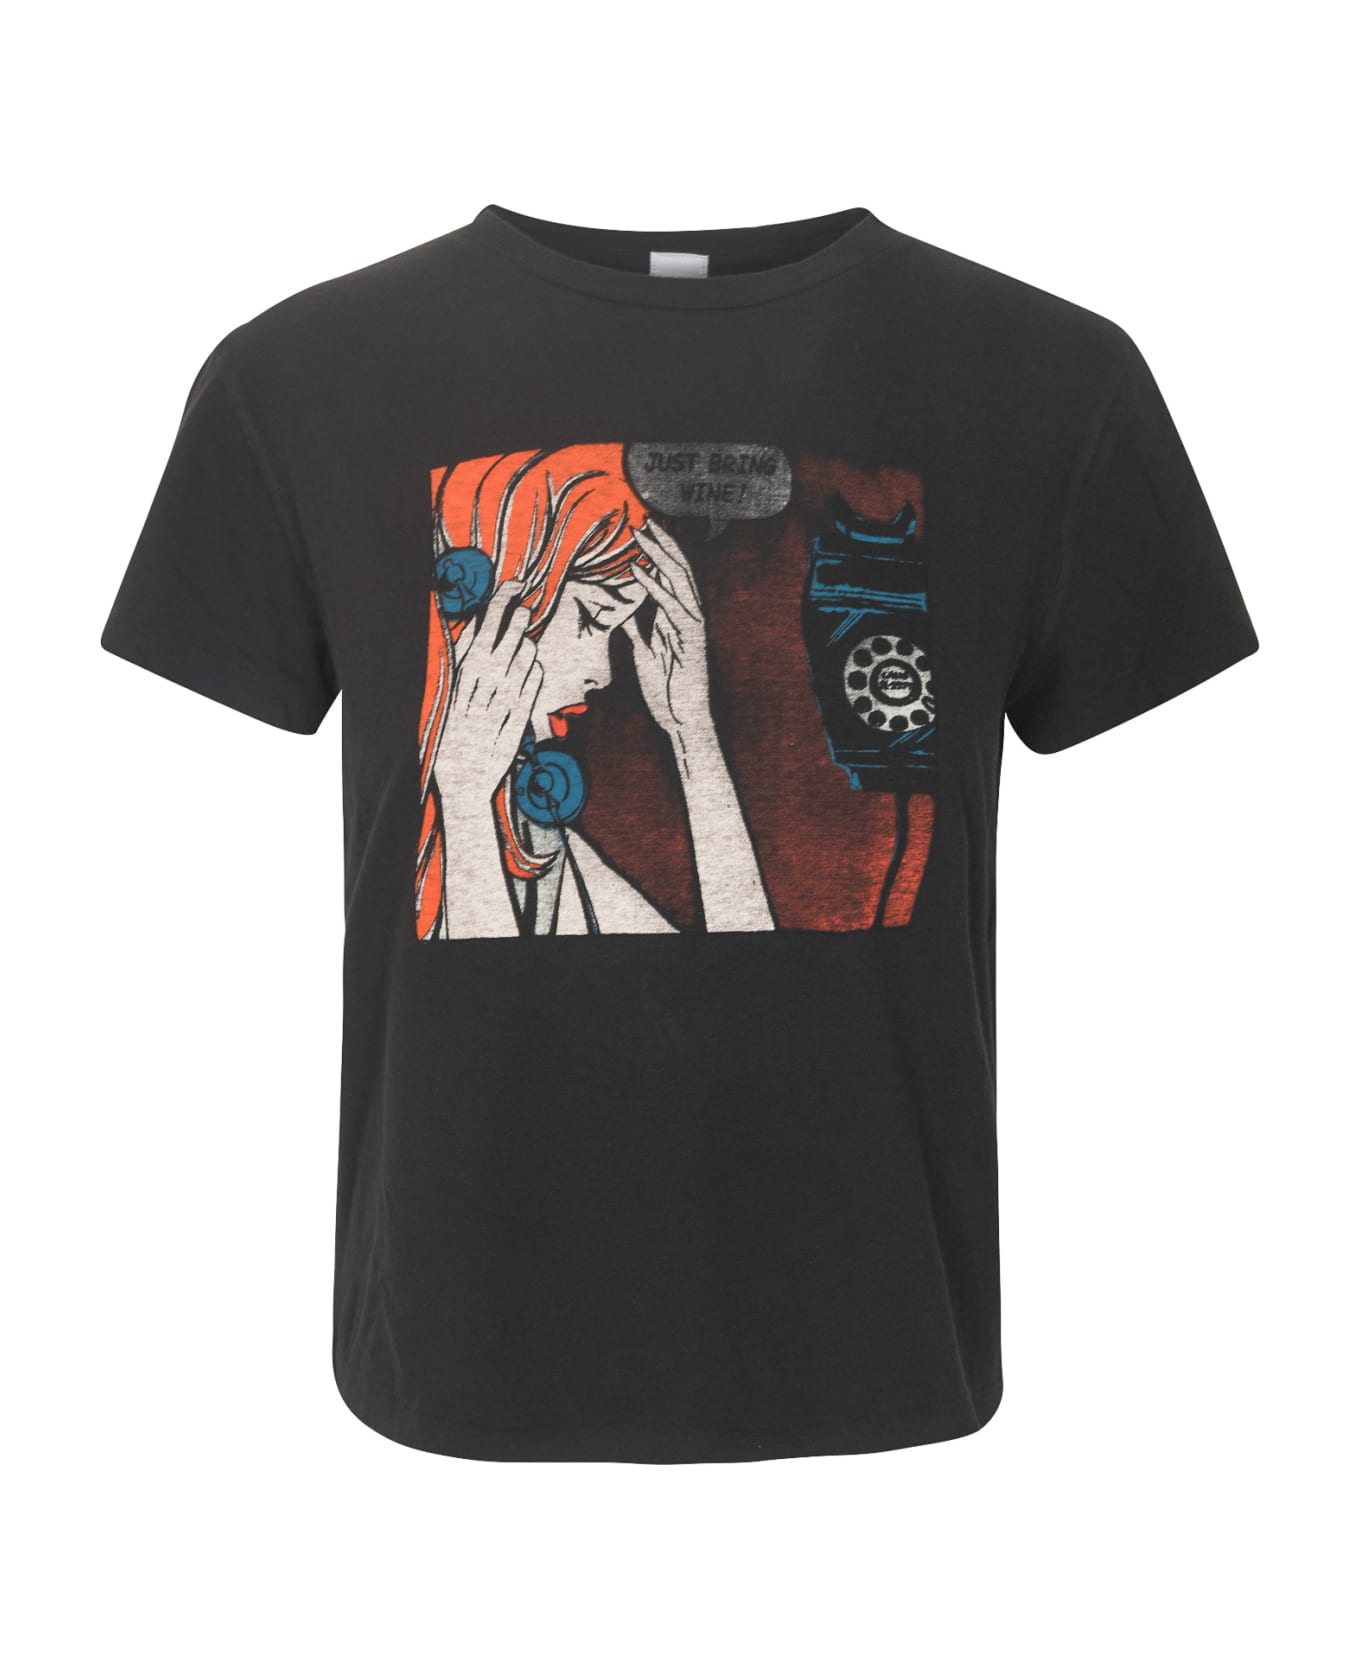 RE/DONE Graphic Print T-shirt - Washed Black